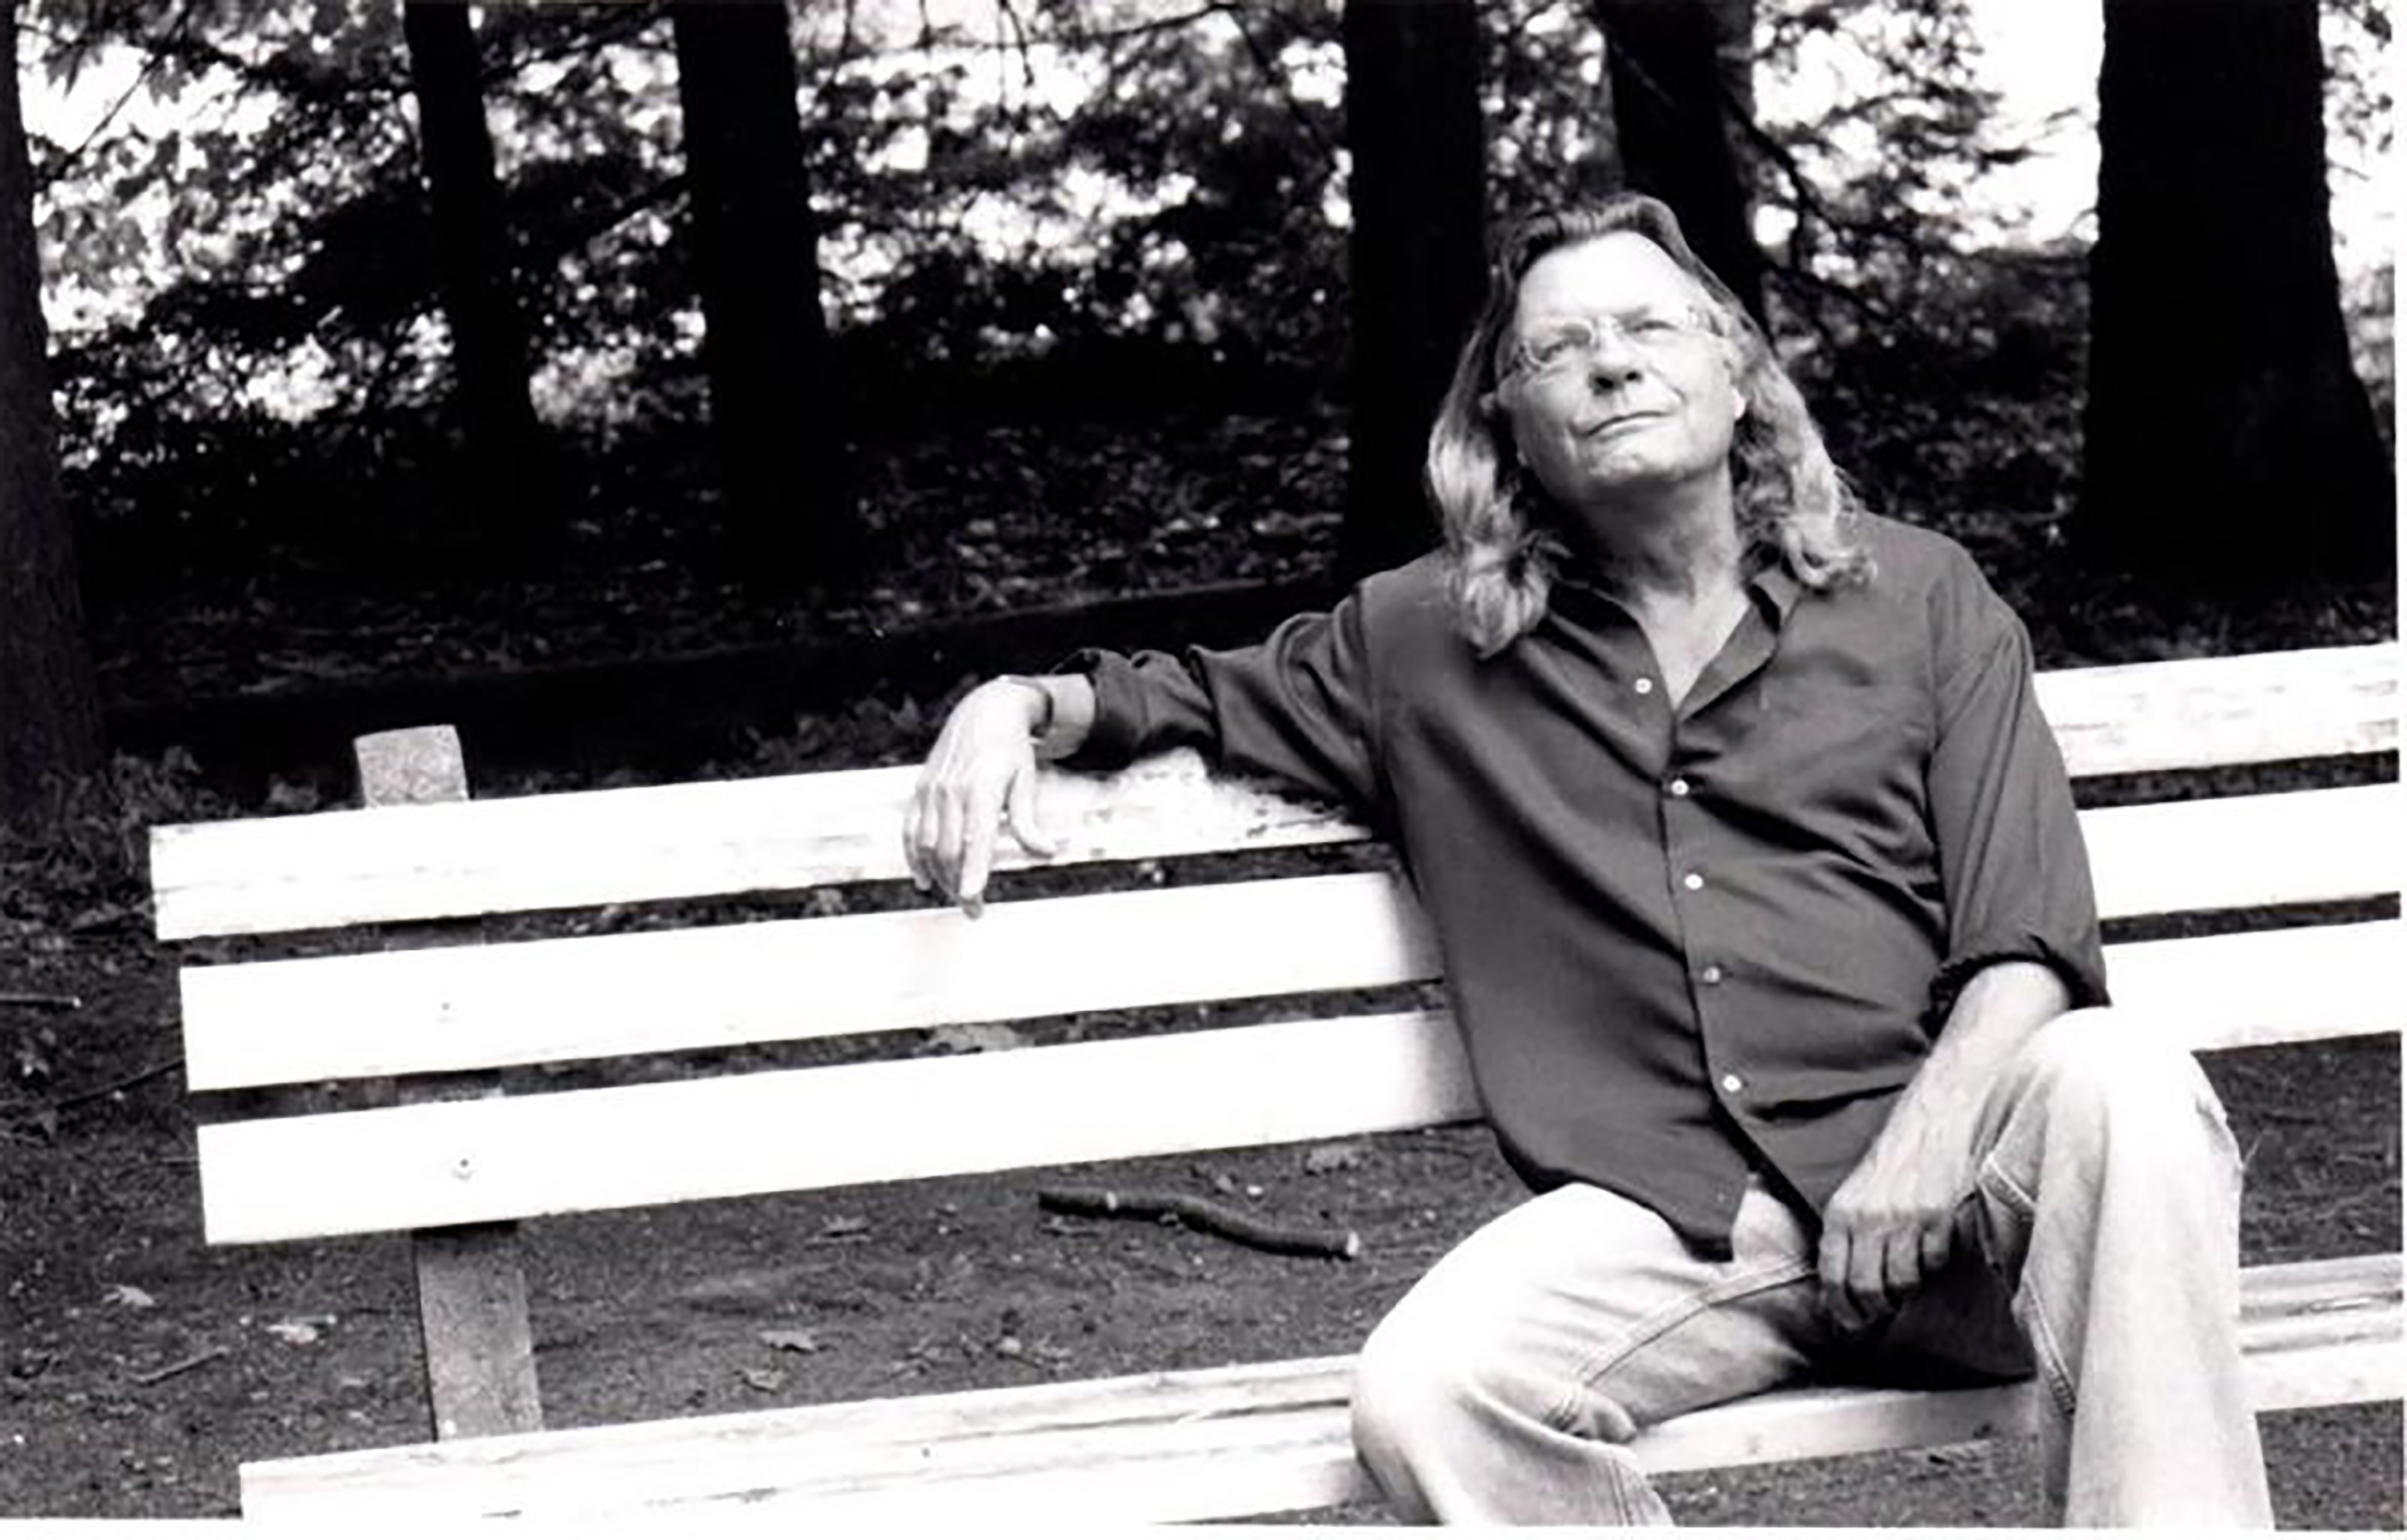 Black and white photo of Thomas Lux sitting on a bench in jeans and a button up long sleeve shirt. He is relaxed with his arm thrown over the top edge of the bench and looking up towards the sky